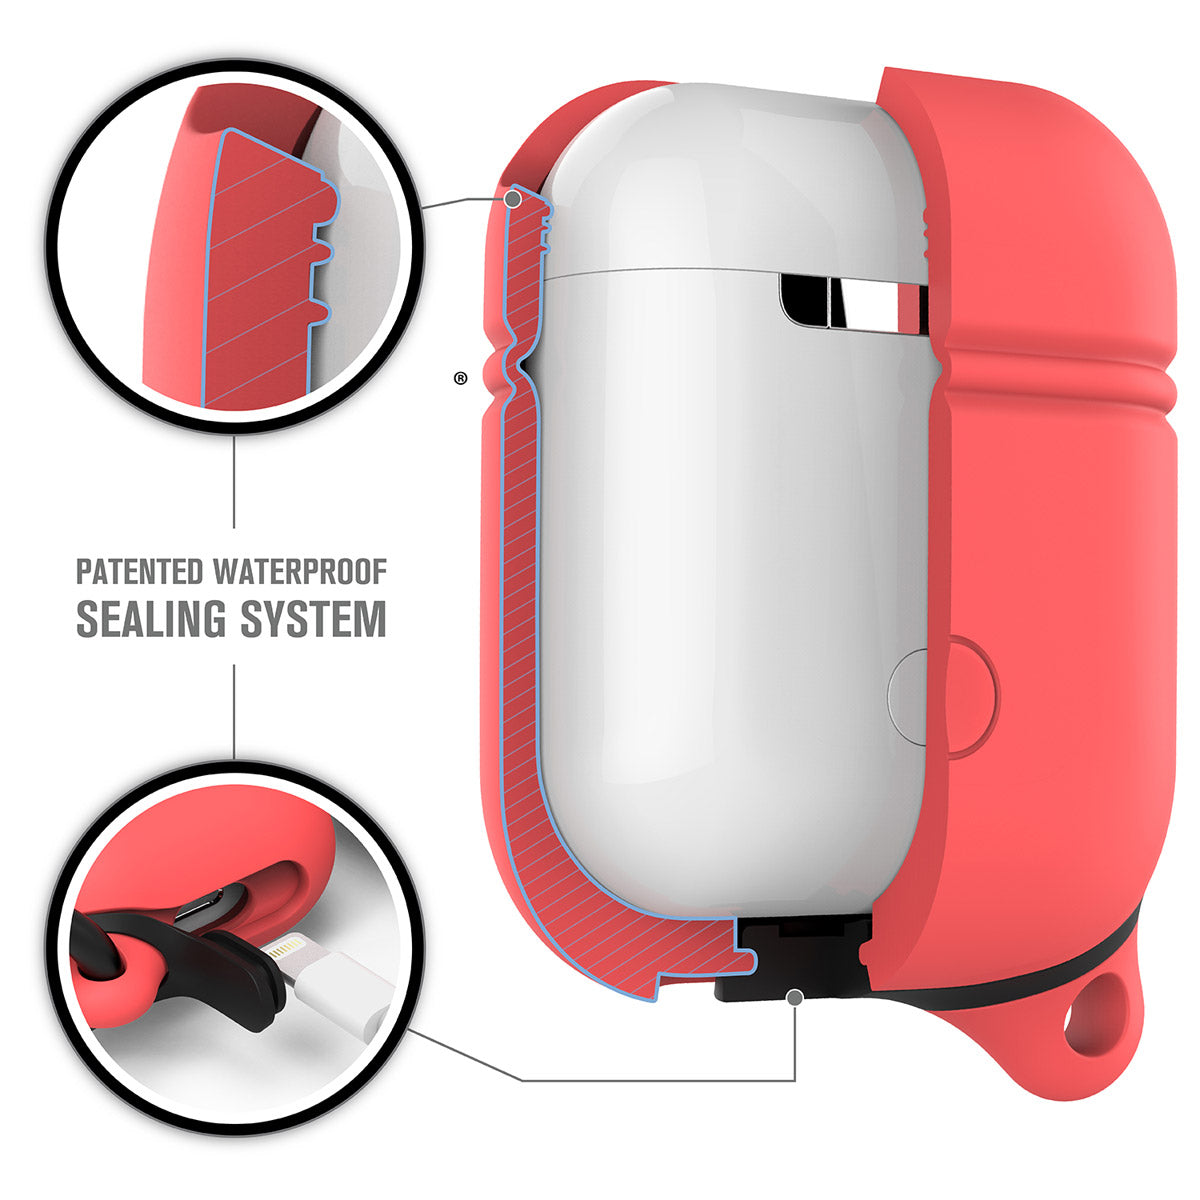 CATAPDCOR | Catalyst airpods gen2/1 waterproof case + carabiner showing the inner materials of the case in coral text reads patented waterproof sealing system